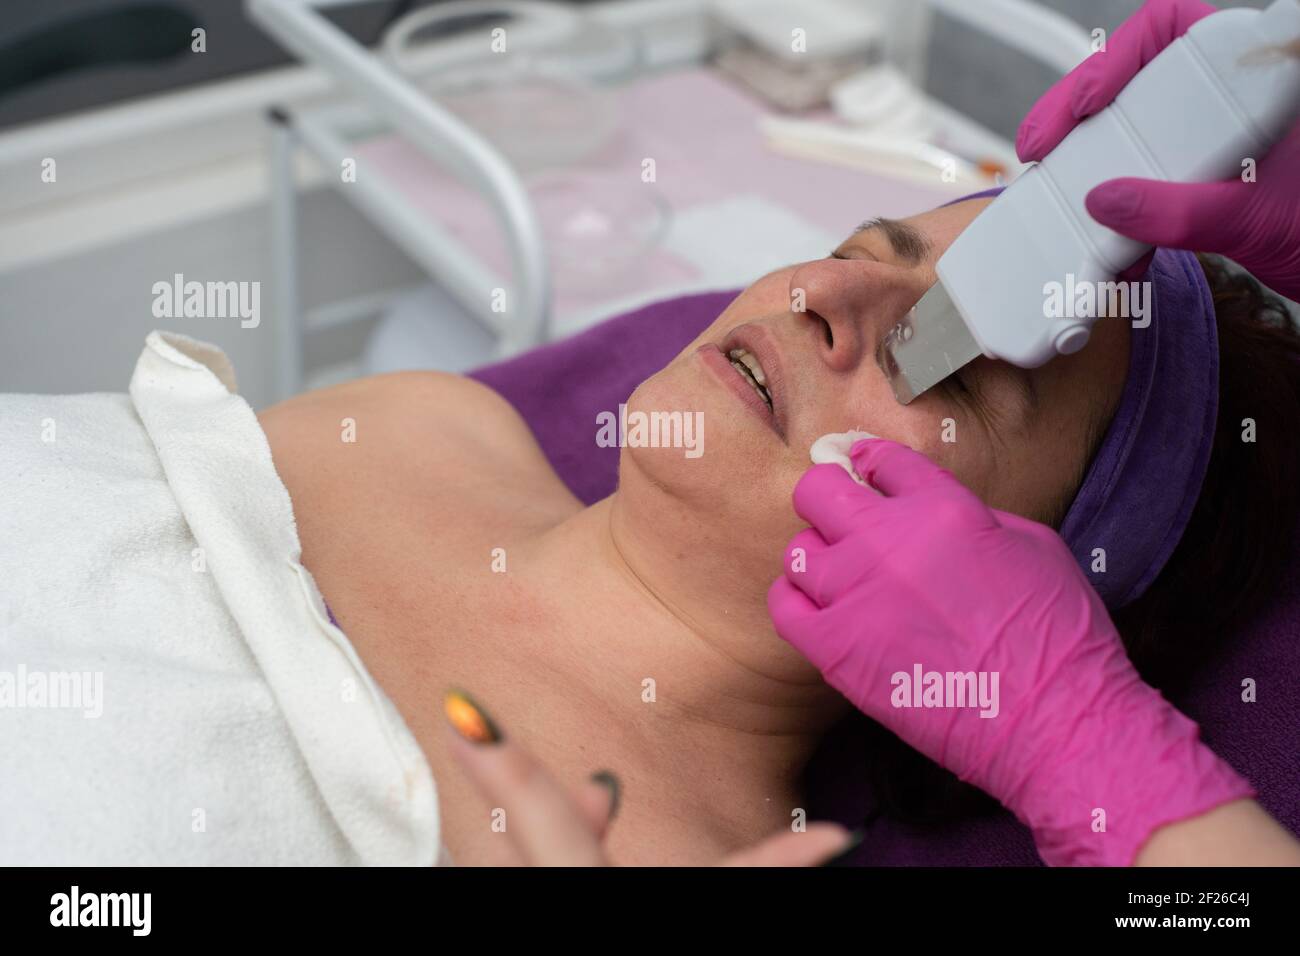 Cavitation device. The beautician gently guides the ultrasound device over the client's face to exfoliate the epidermis. Stock Photo